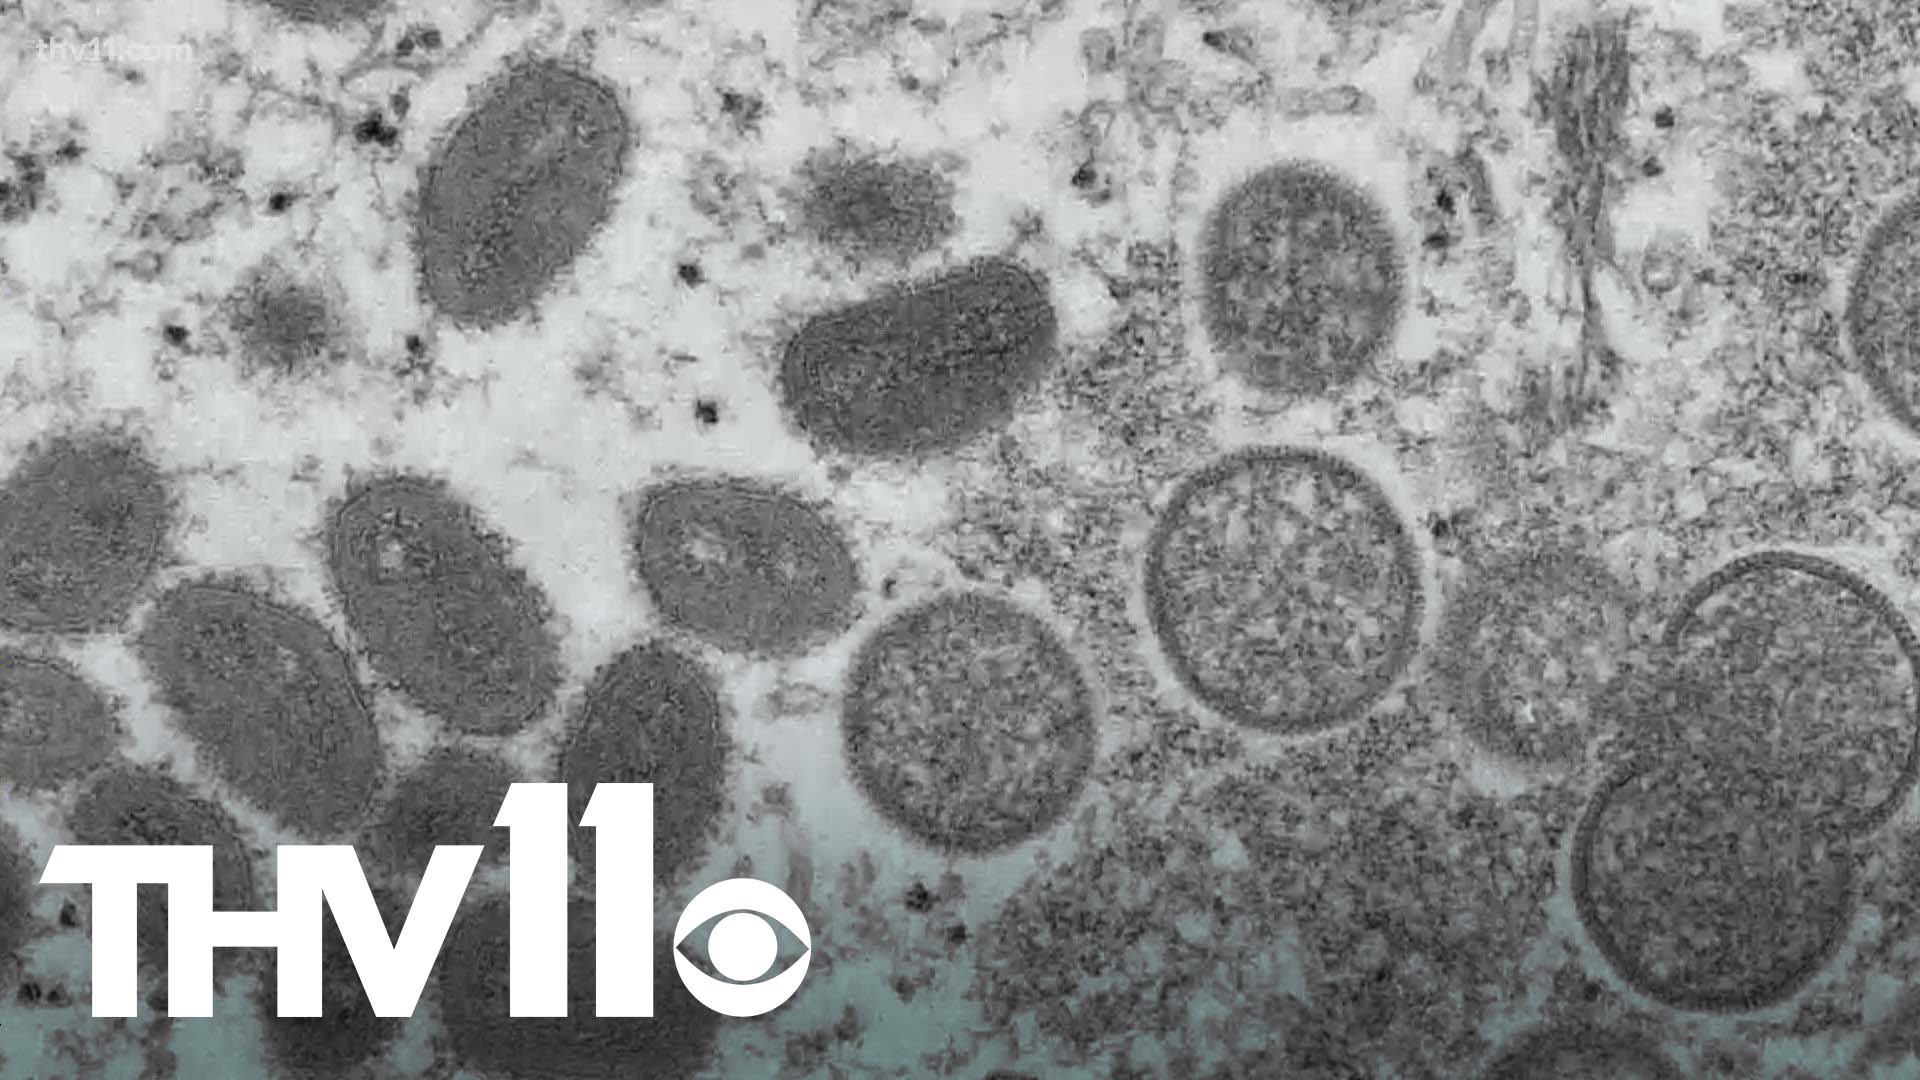 In less than a month, a new monkeypox outbreak has spread rapidly across the world. It's now in the U.S., and Arkansas health officials are preparing.